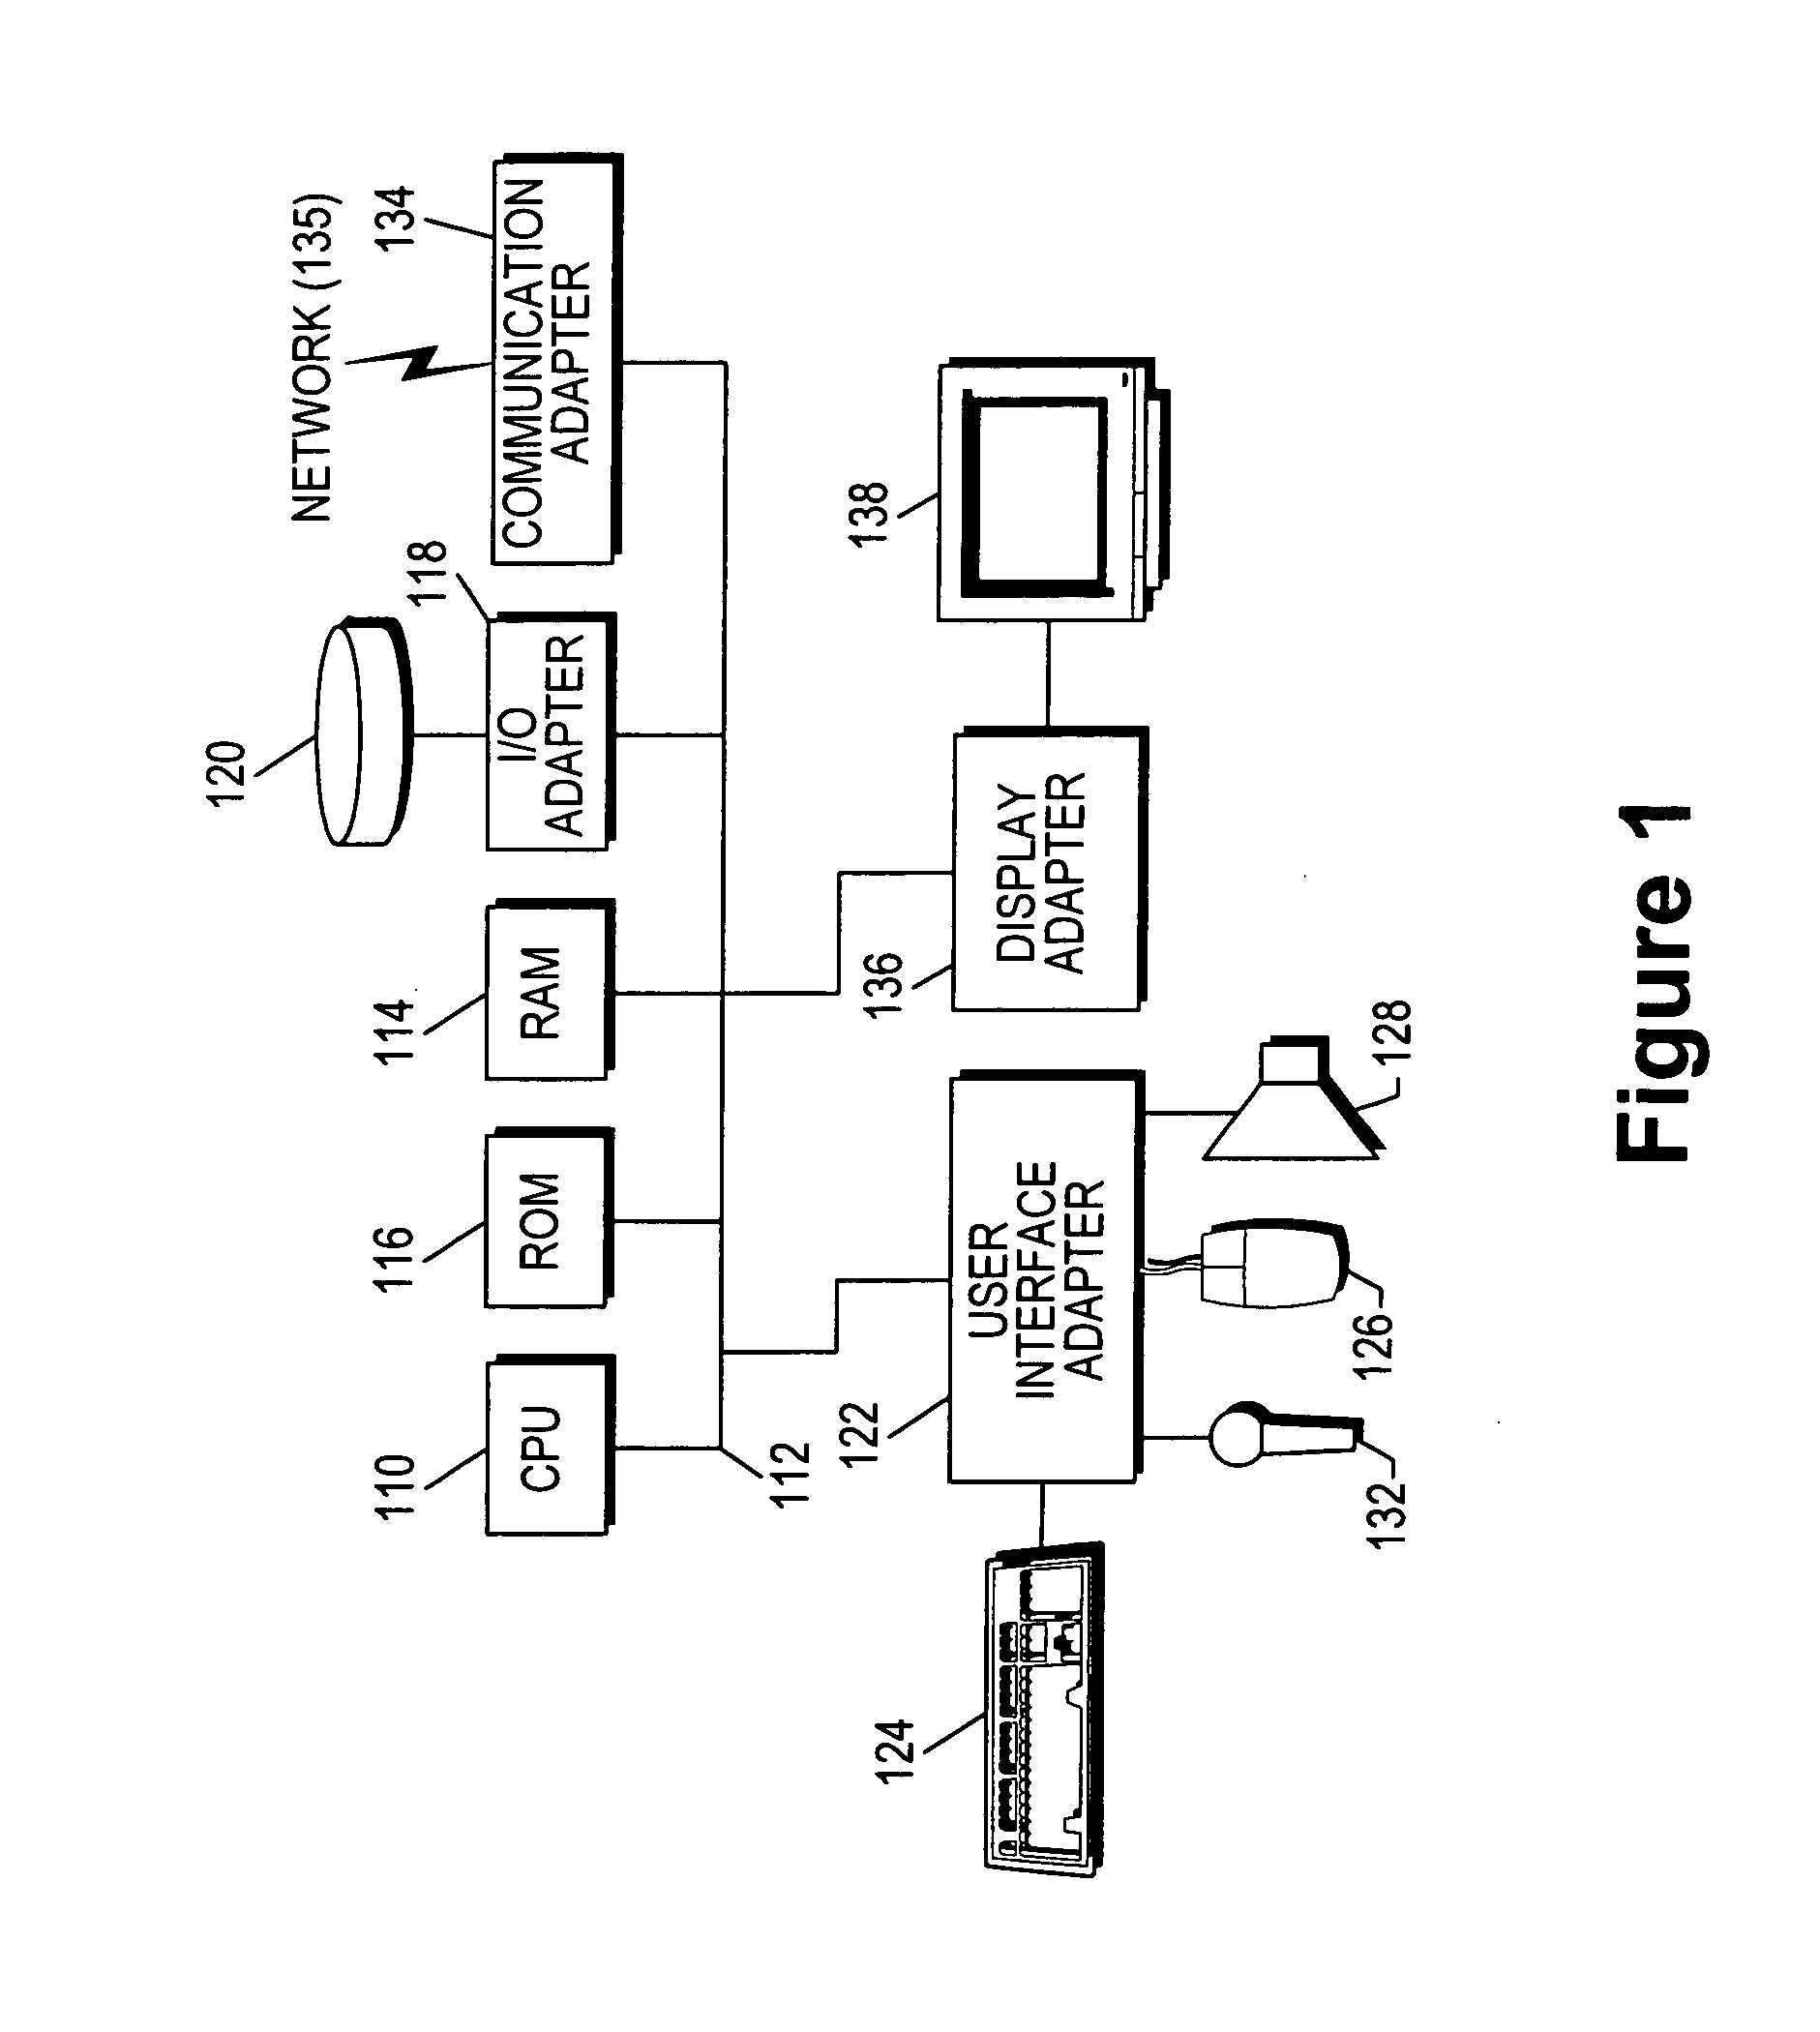 Scheduling and planning maintenance and service in a network-based supply chain environment